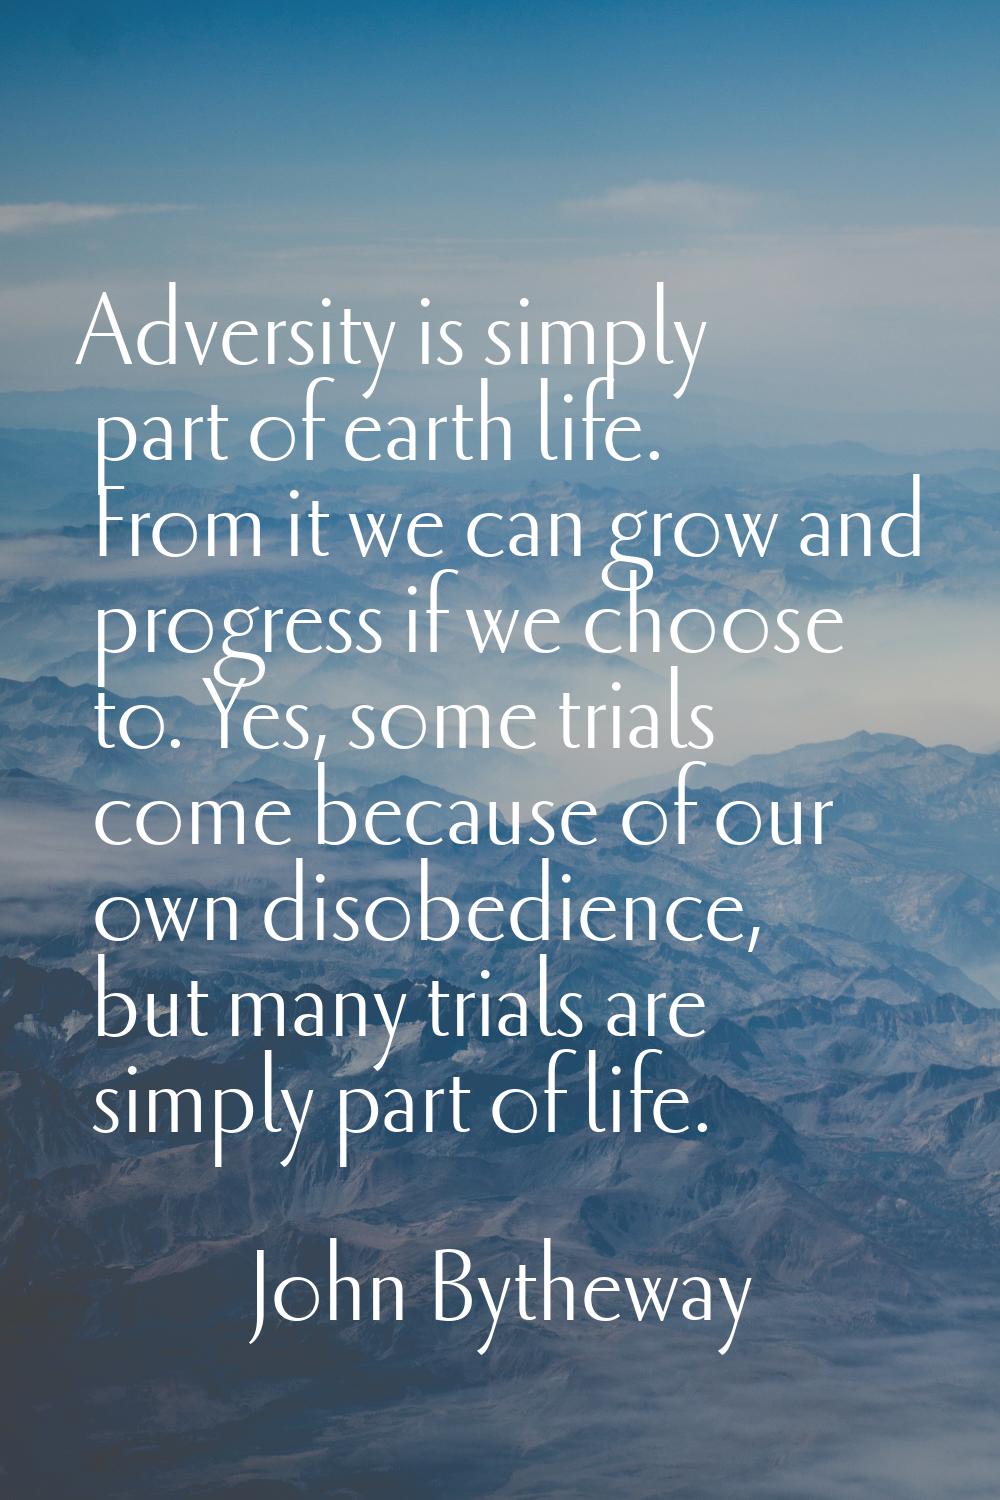 Adversity is simply part of earth life. From it we can grow and progress if we choose to. Yes, some